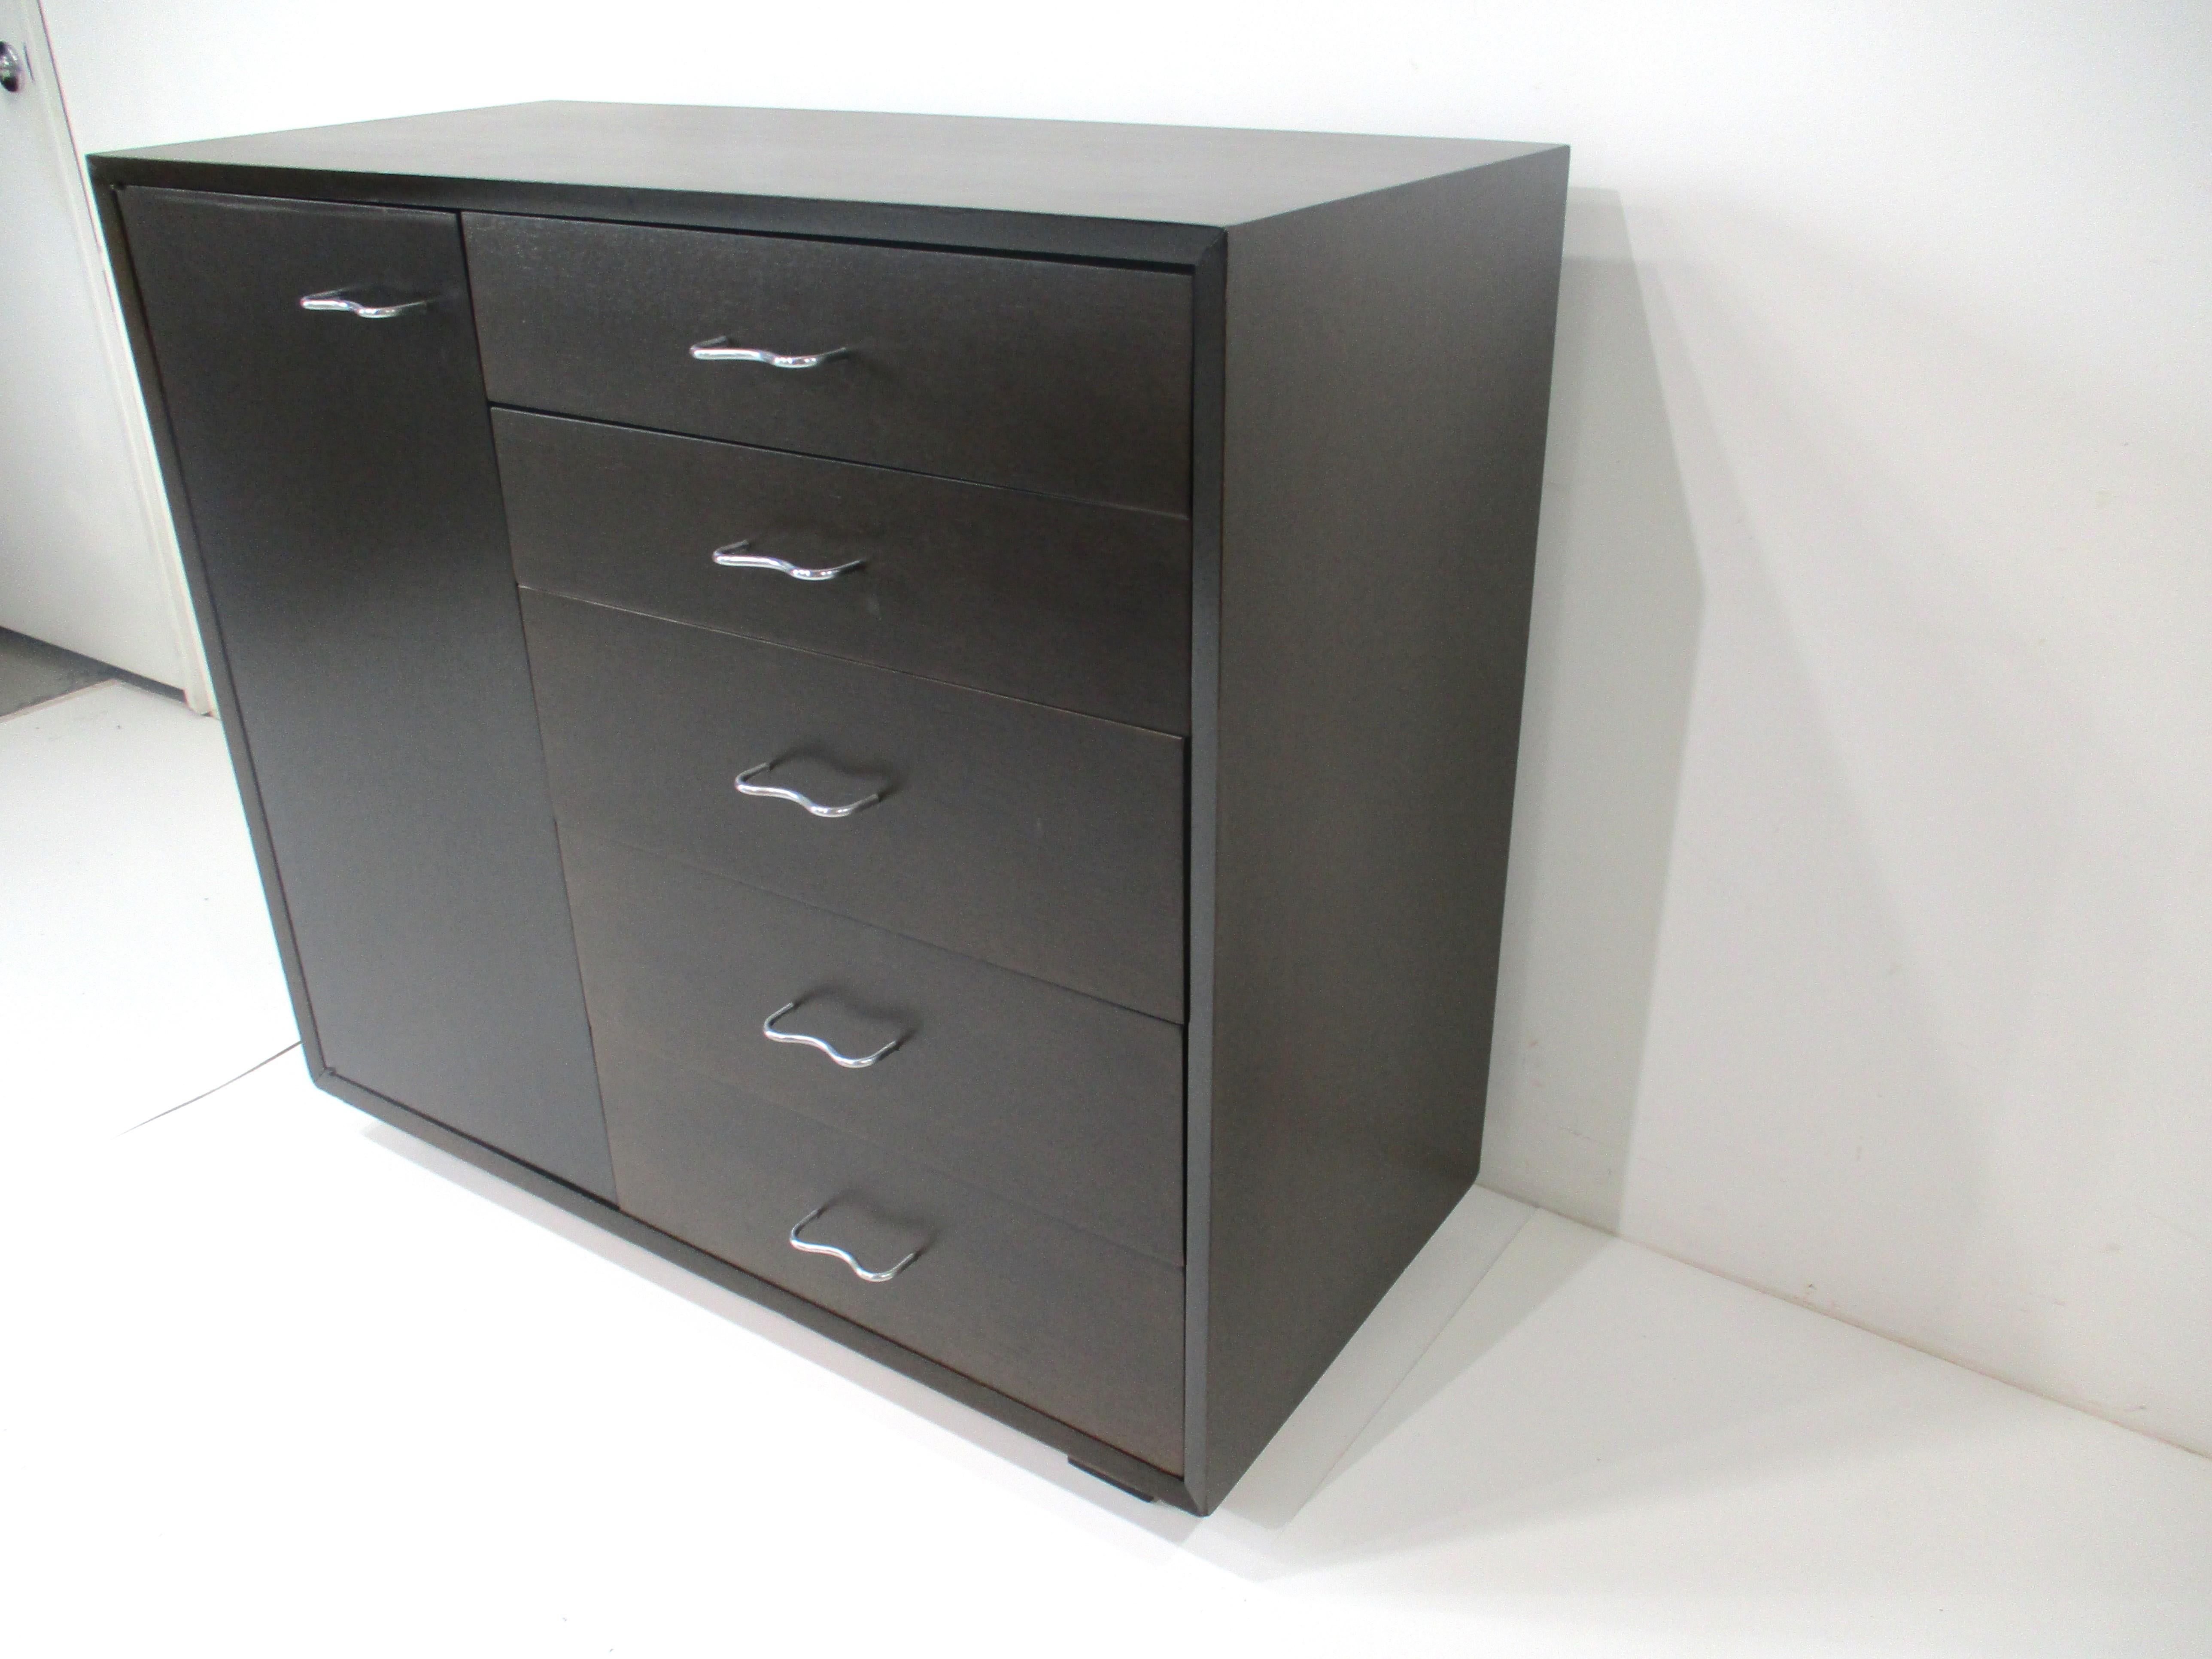 A very well crafted dresser chest or cabinet standing on shorter legs in a dark ebony finish with side door having two adjustable shelves . The other side has five drawers , all with sculptural stainless steel pulls and contrasting oak interior to